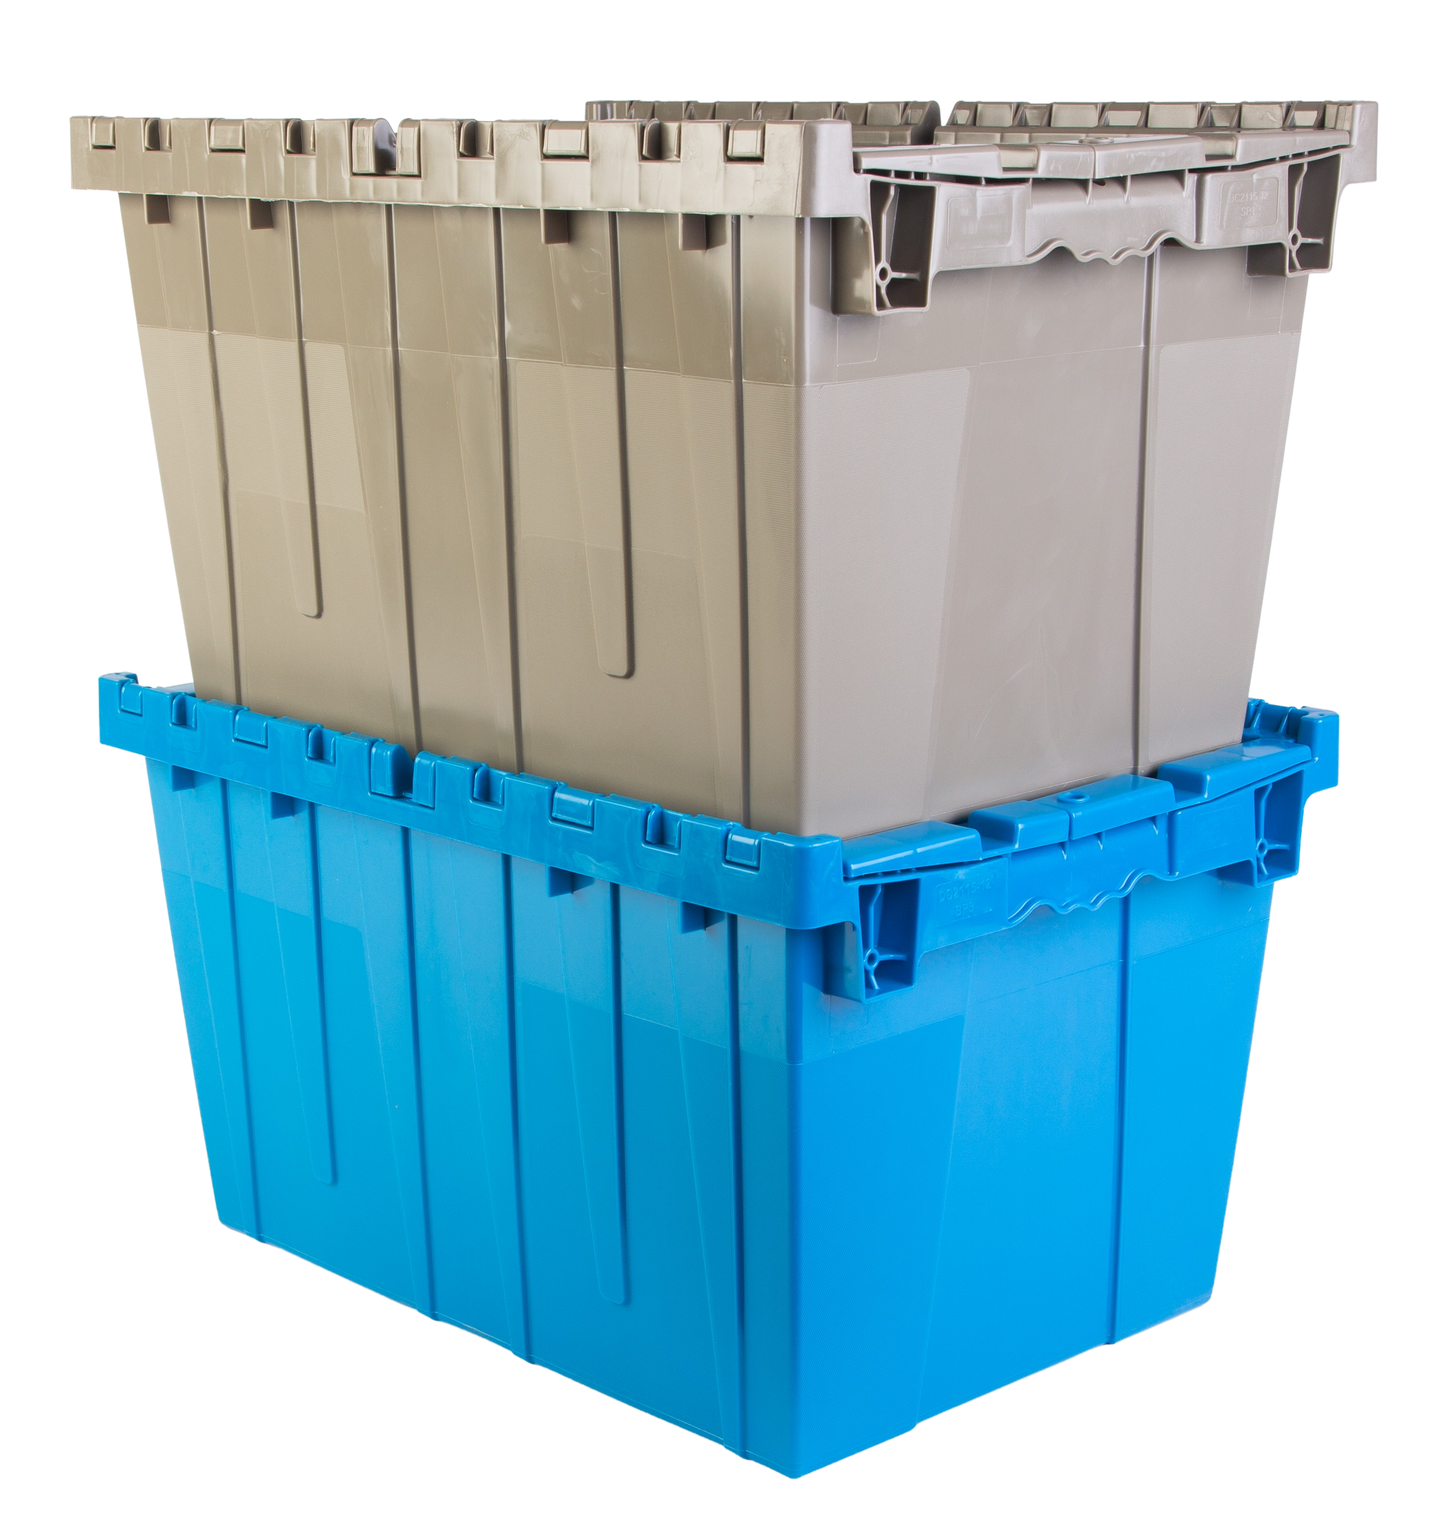 14-Gallon Industrial Plastic Tote with Hinged Lids, Blue - Heavy-Duty Large  22 L x 15 W x 12 H Container buy in stock in U.S. in IDL Packaging